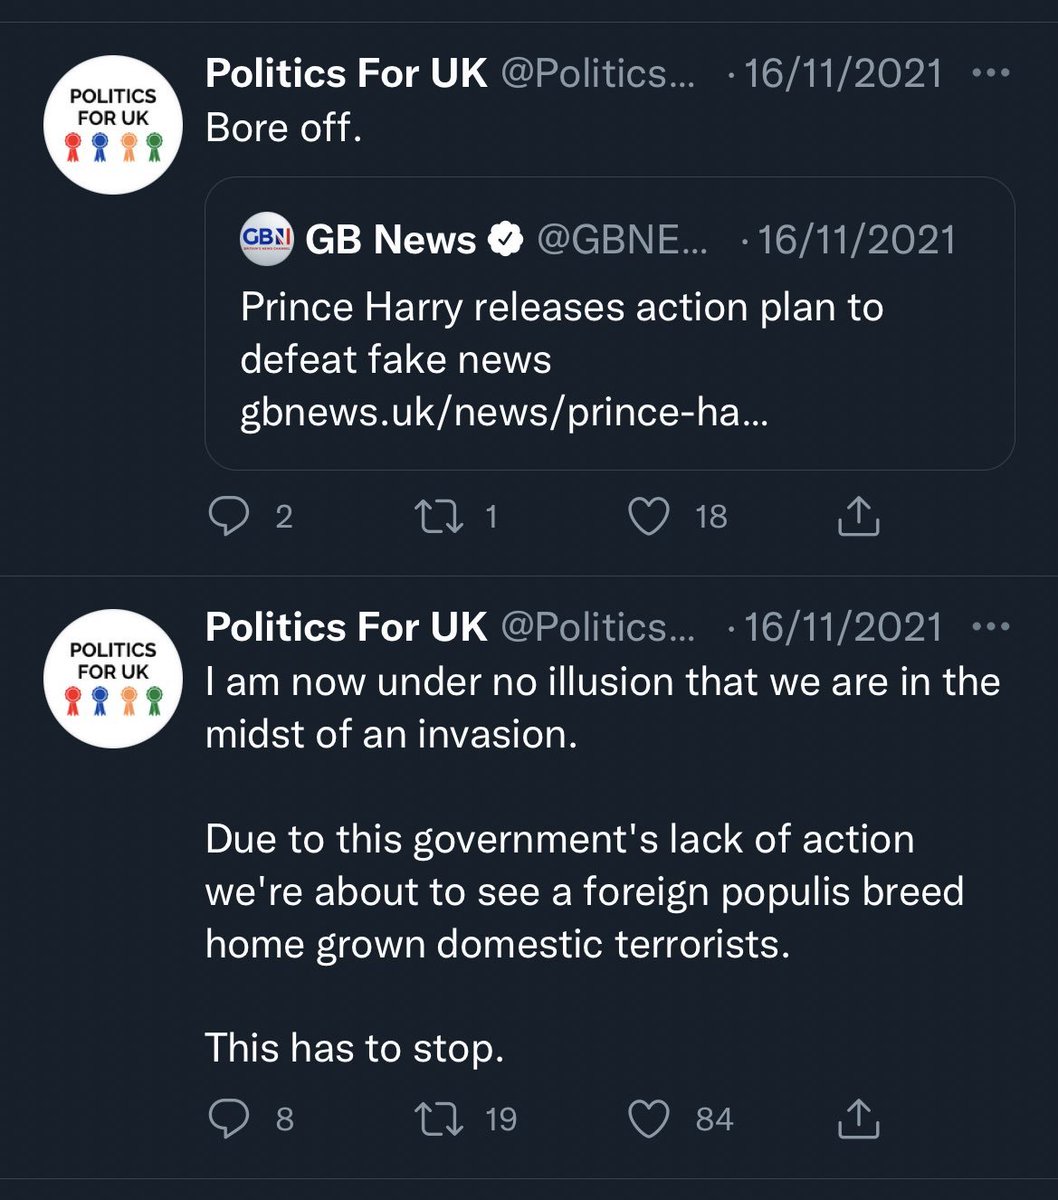 Just to warn folks, there's an account called PoliticsForUK (that have tried to capitalise on the collapse of PoliticsForAll) who are far worse at citing sources and have a track record of blatant bias (see pics).

There are much better options out there to get your news!